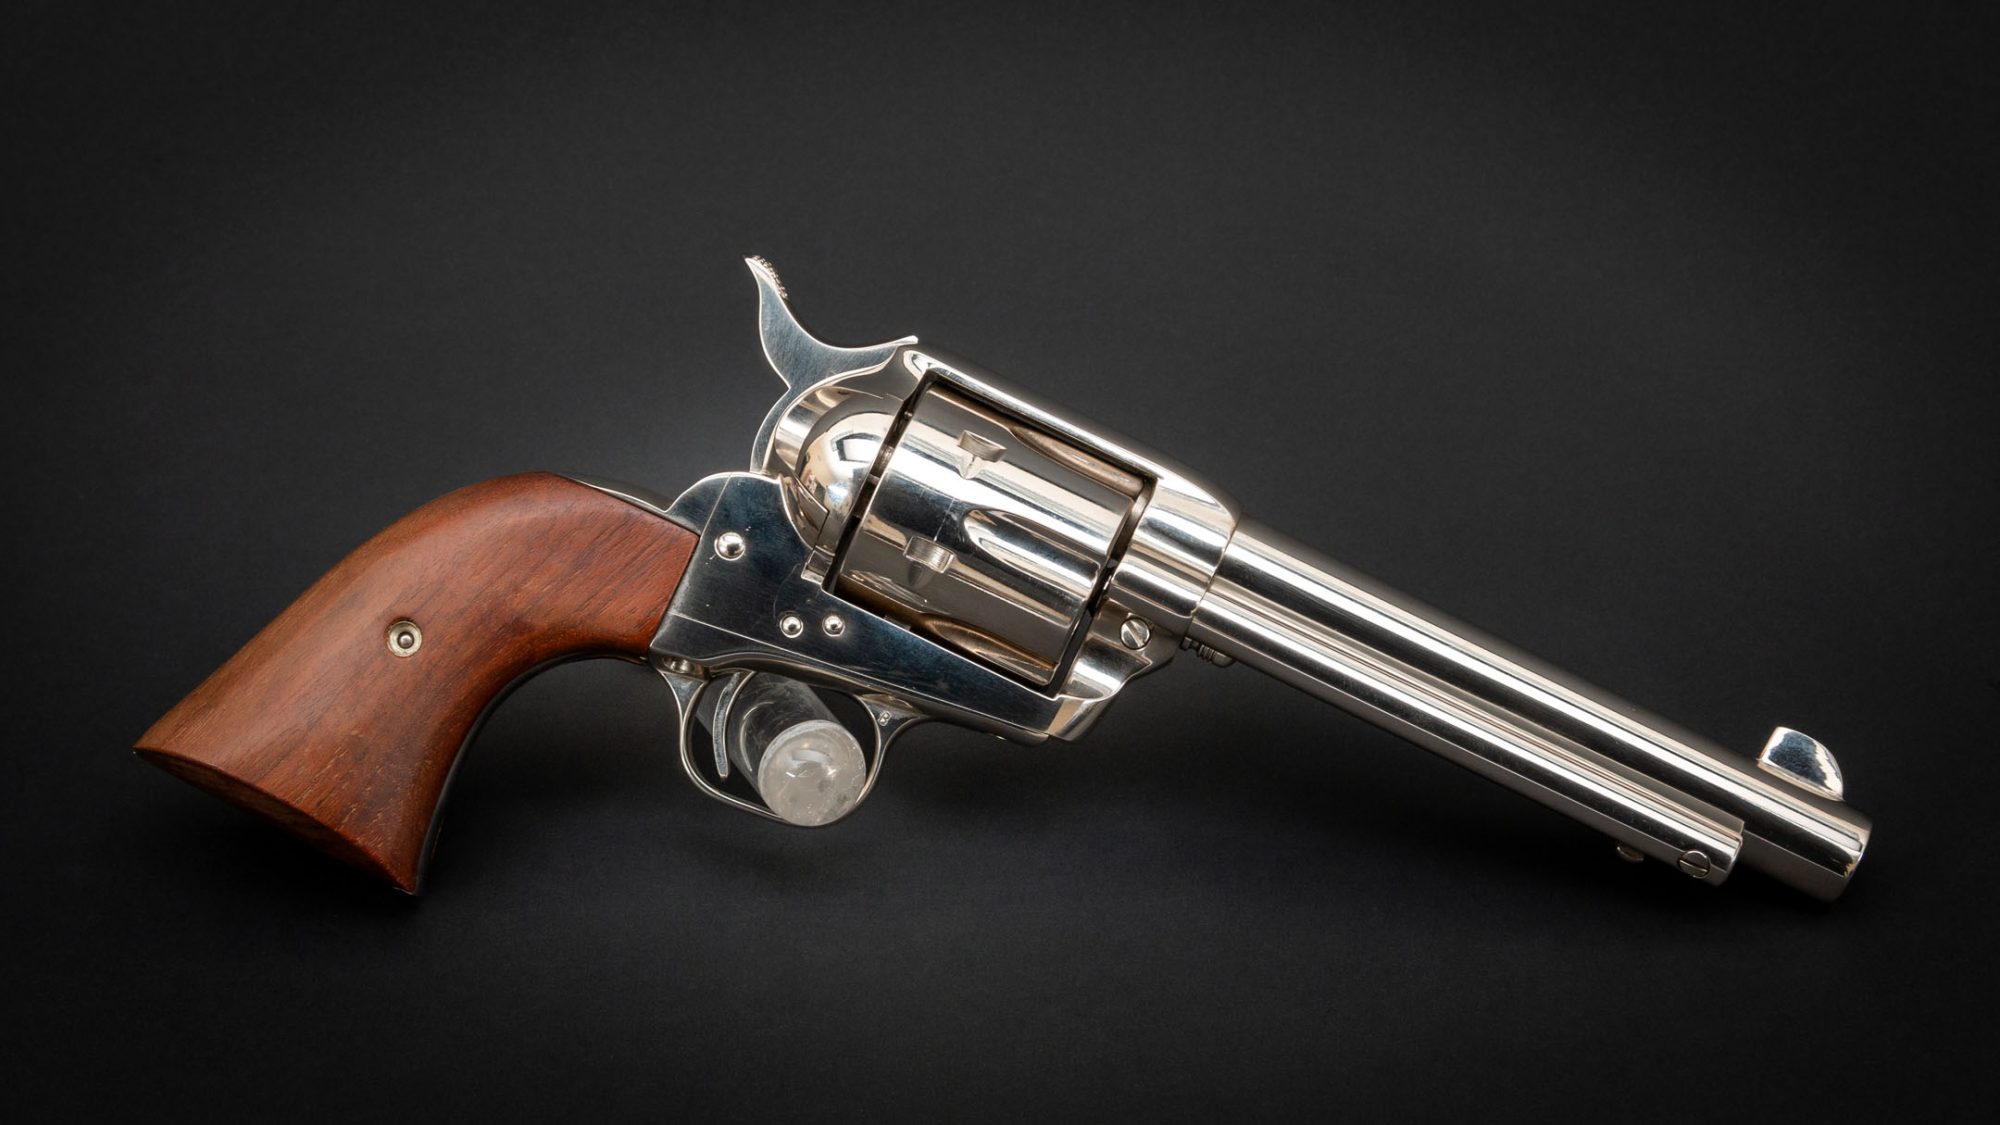 Nickel plated Colt SAA revolver in .44 Special, for sale by Turnbull Restoration Co. of Bloomfield, NY